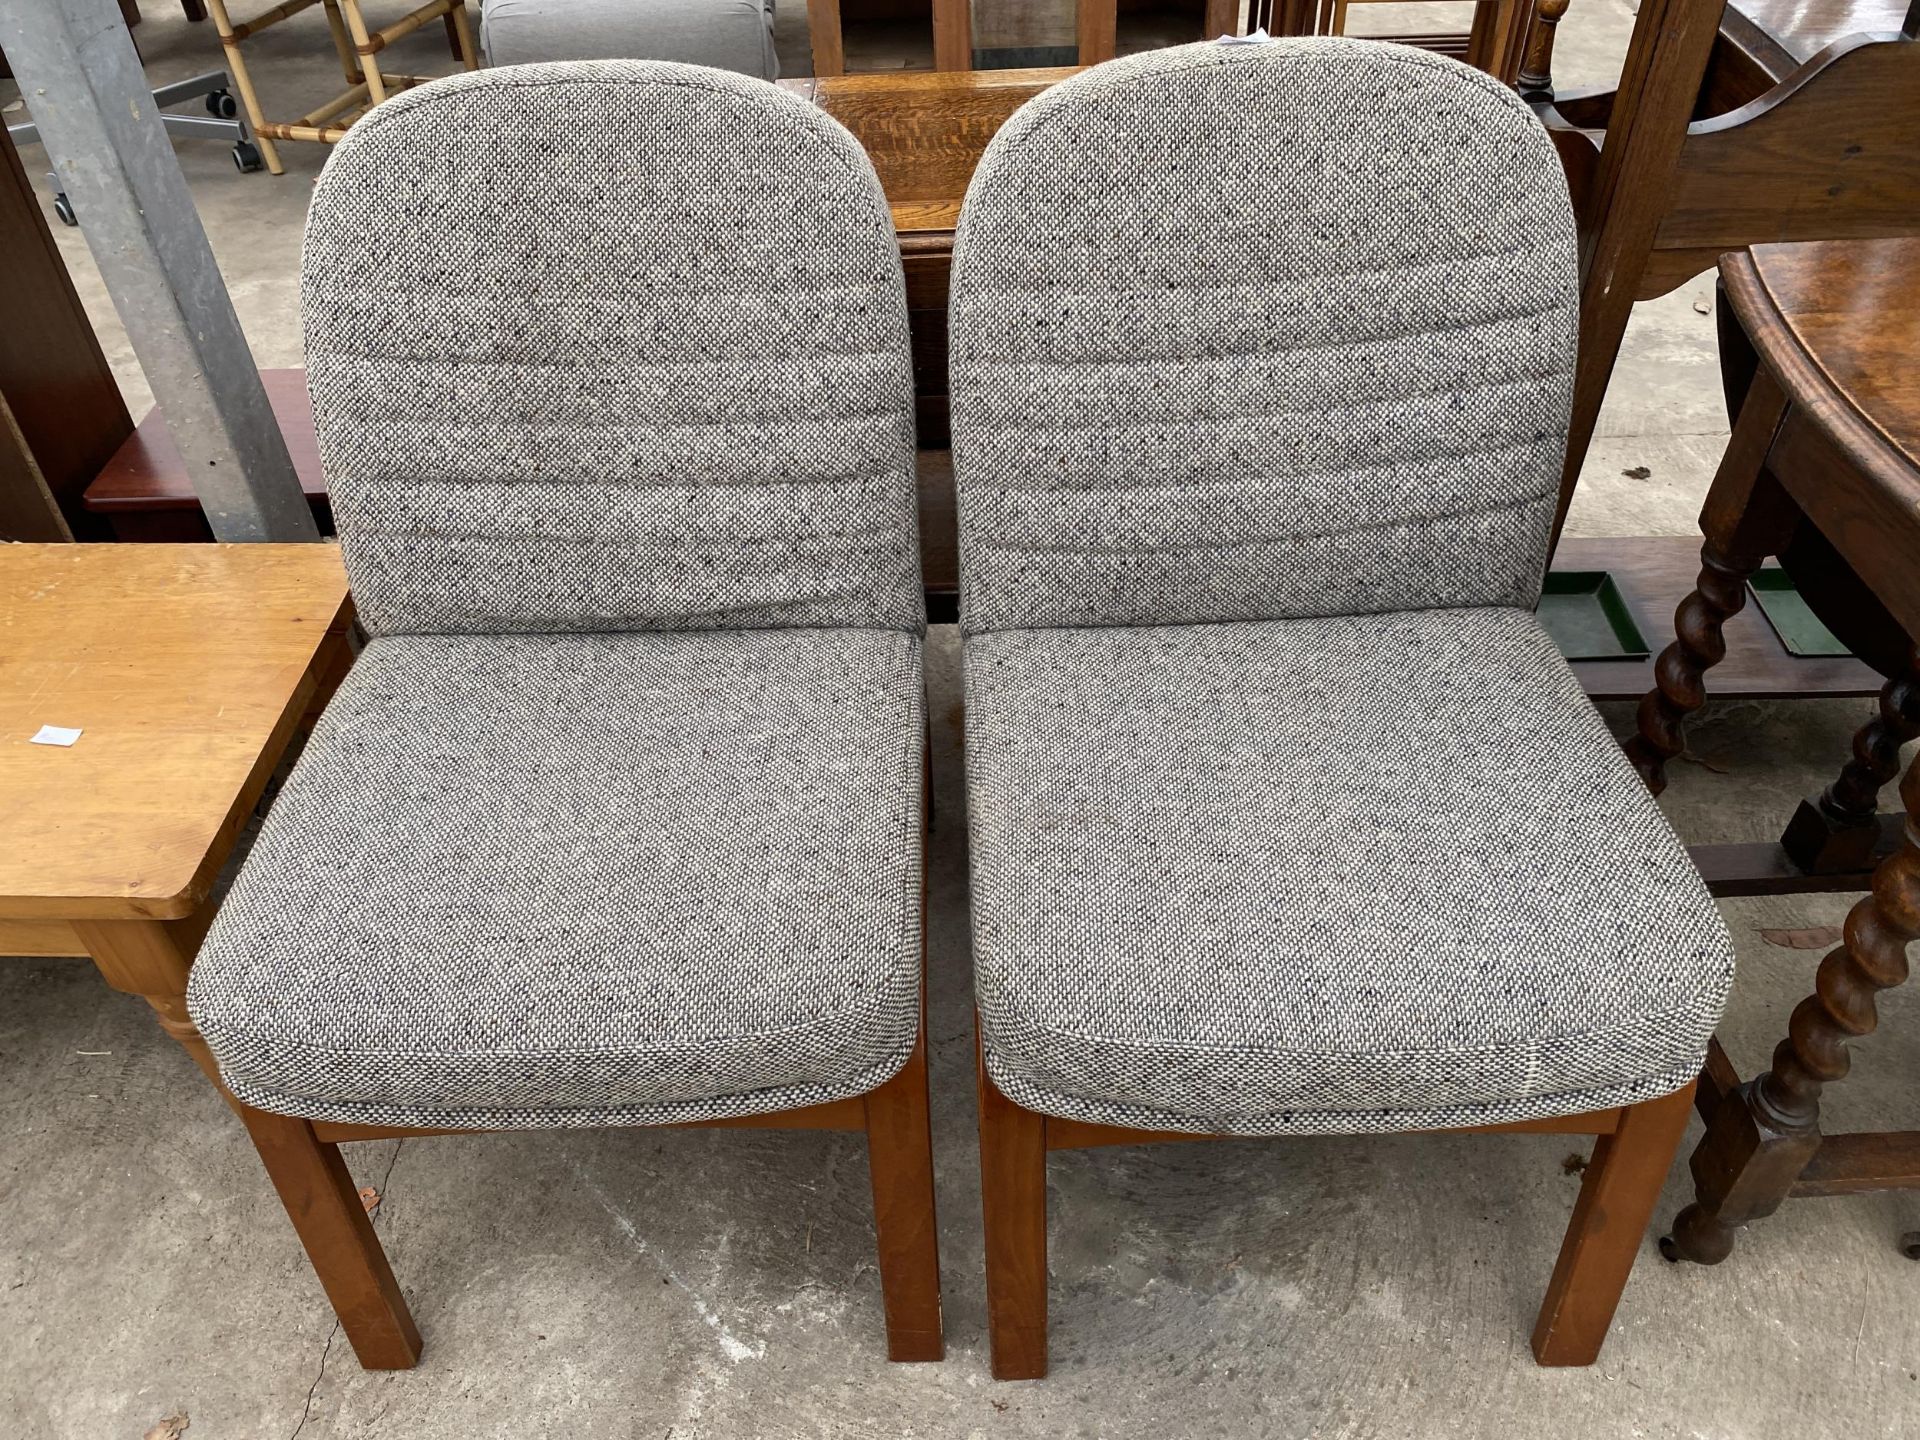 A PAIR OF MODERN BENTWOOD AND UPHOLSTERED 'VERCO' DINING CHAIRS